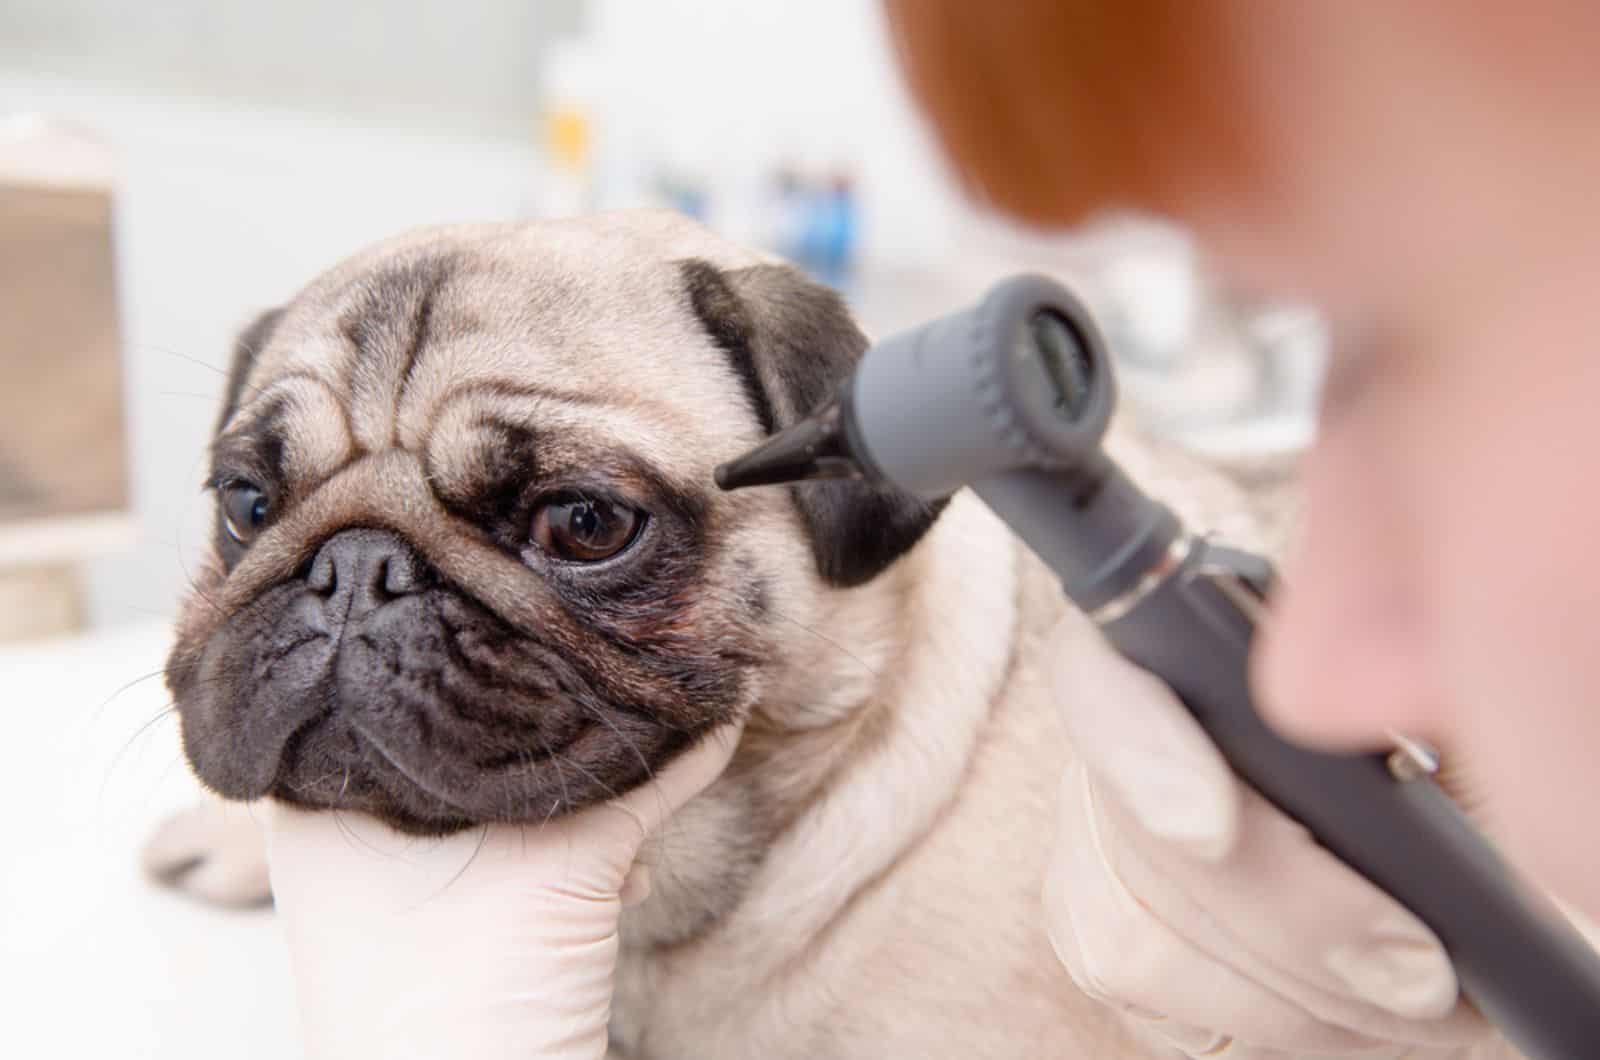 professional veterinary doctor examining the pug's eye  with an otoscope